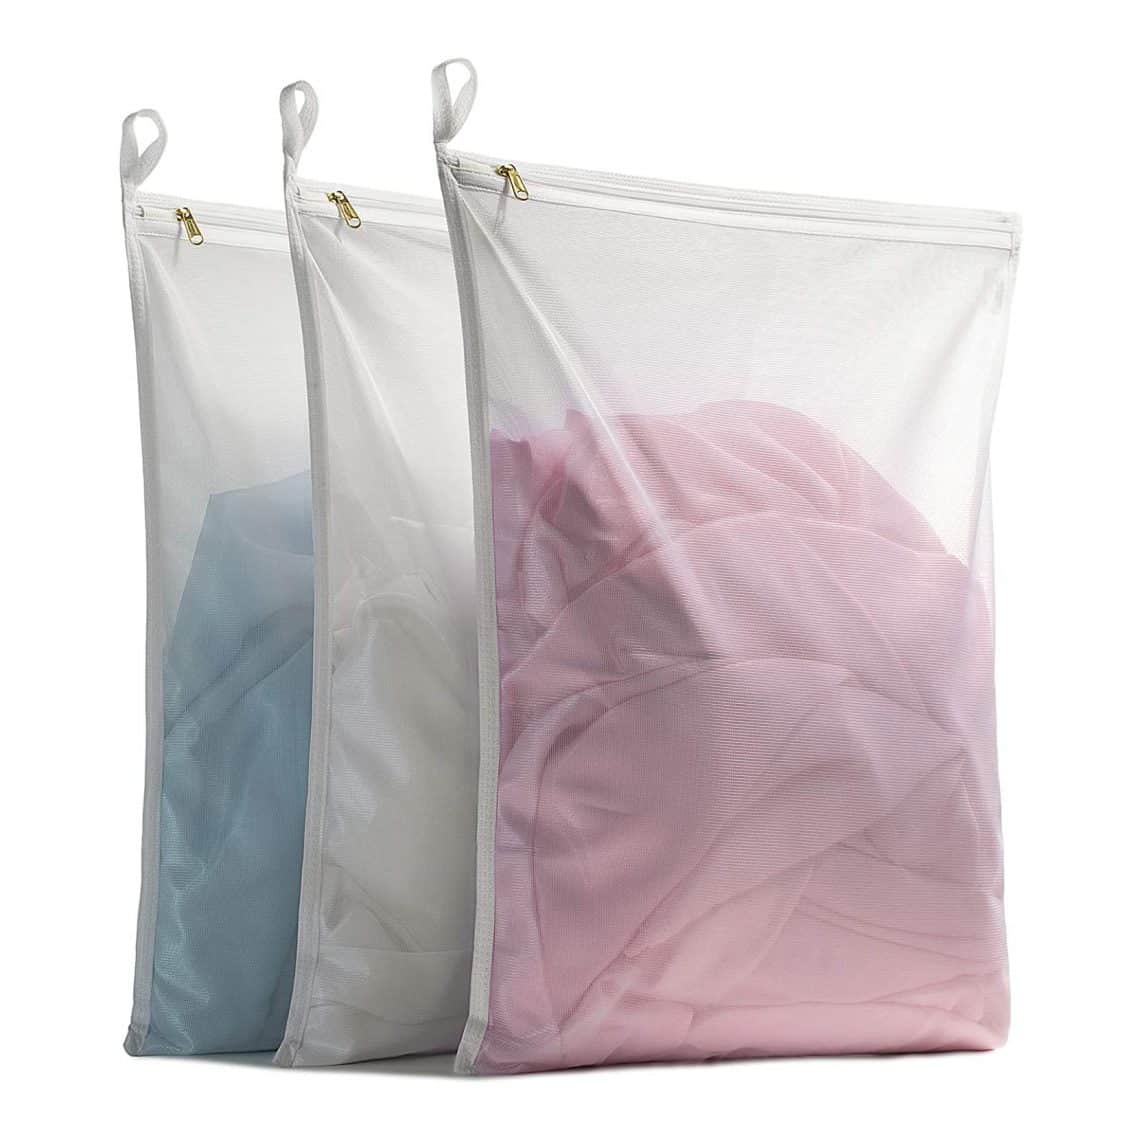 Top 10 Best Mesh Laundry Bags in 2023 Reviews | Buyer's Guide